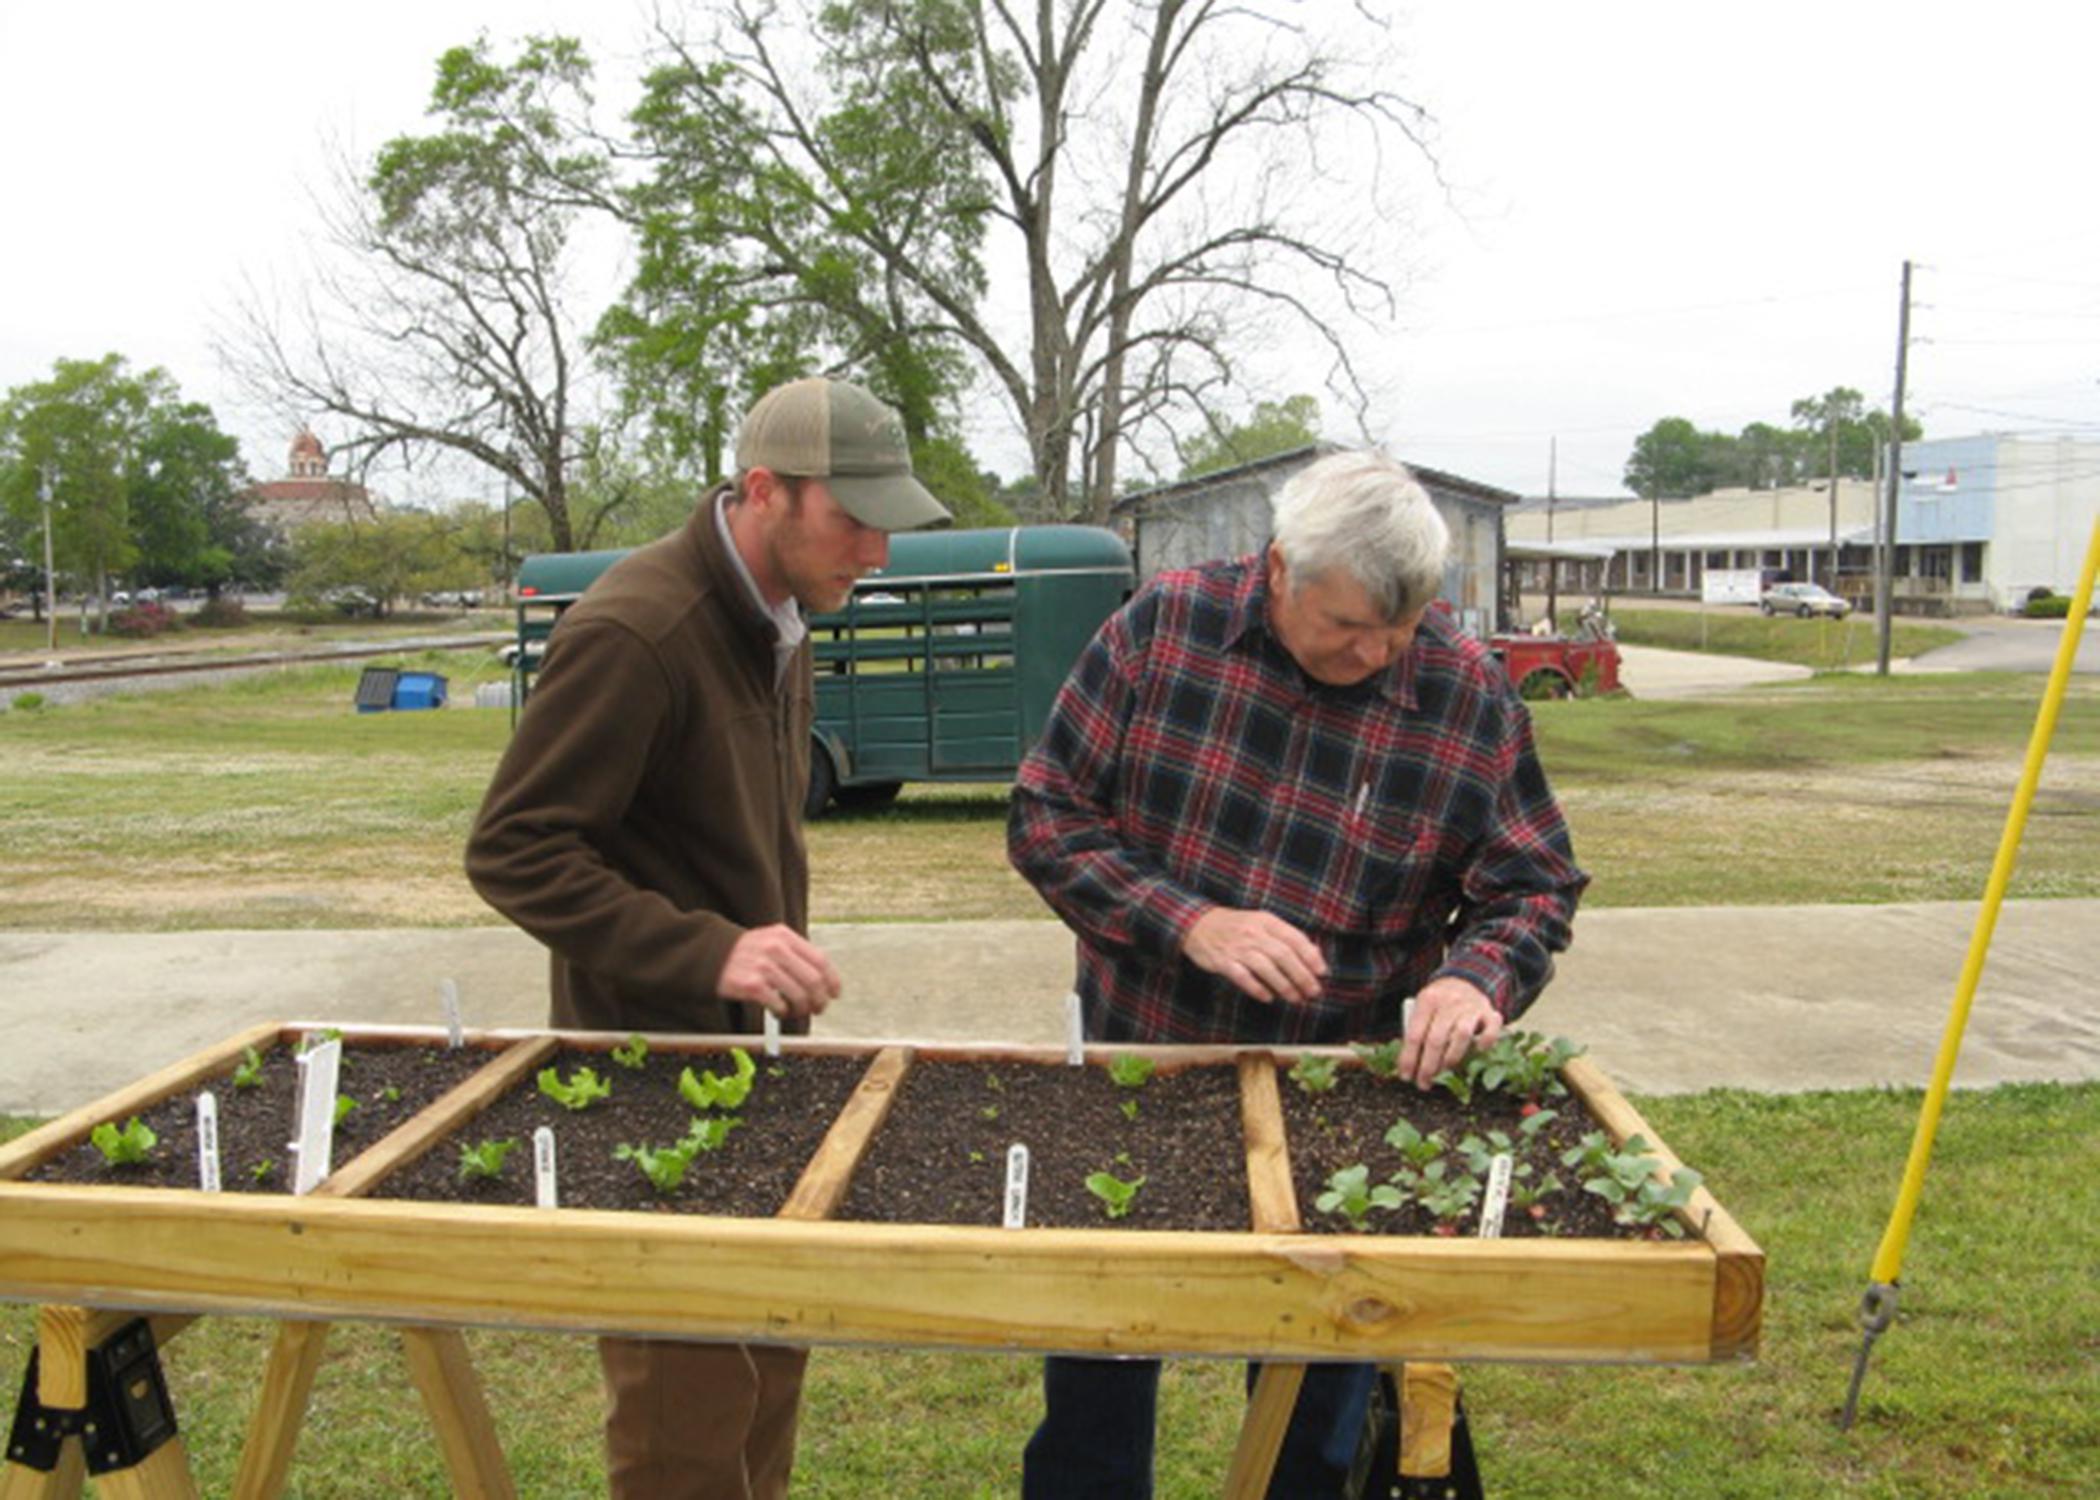 Ross Overstreet, Mississippi State University Extension agent in Lamar County, and Pine Belt Master Gardener Paul Cavanaugh check the progress of plants in the first demonstration salad table in 2013. The project grew in popularity and recently earned the Master Gardeners an international award for excellence. (File photo by MSU Extension Service/Liz Sadler)